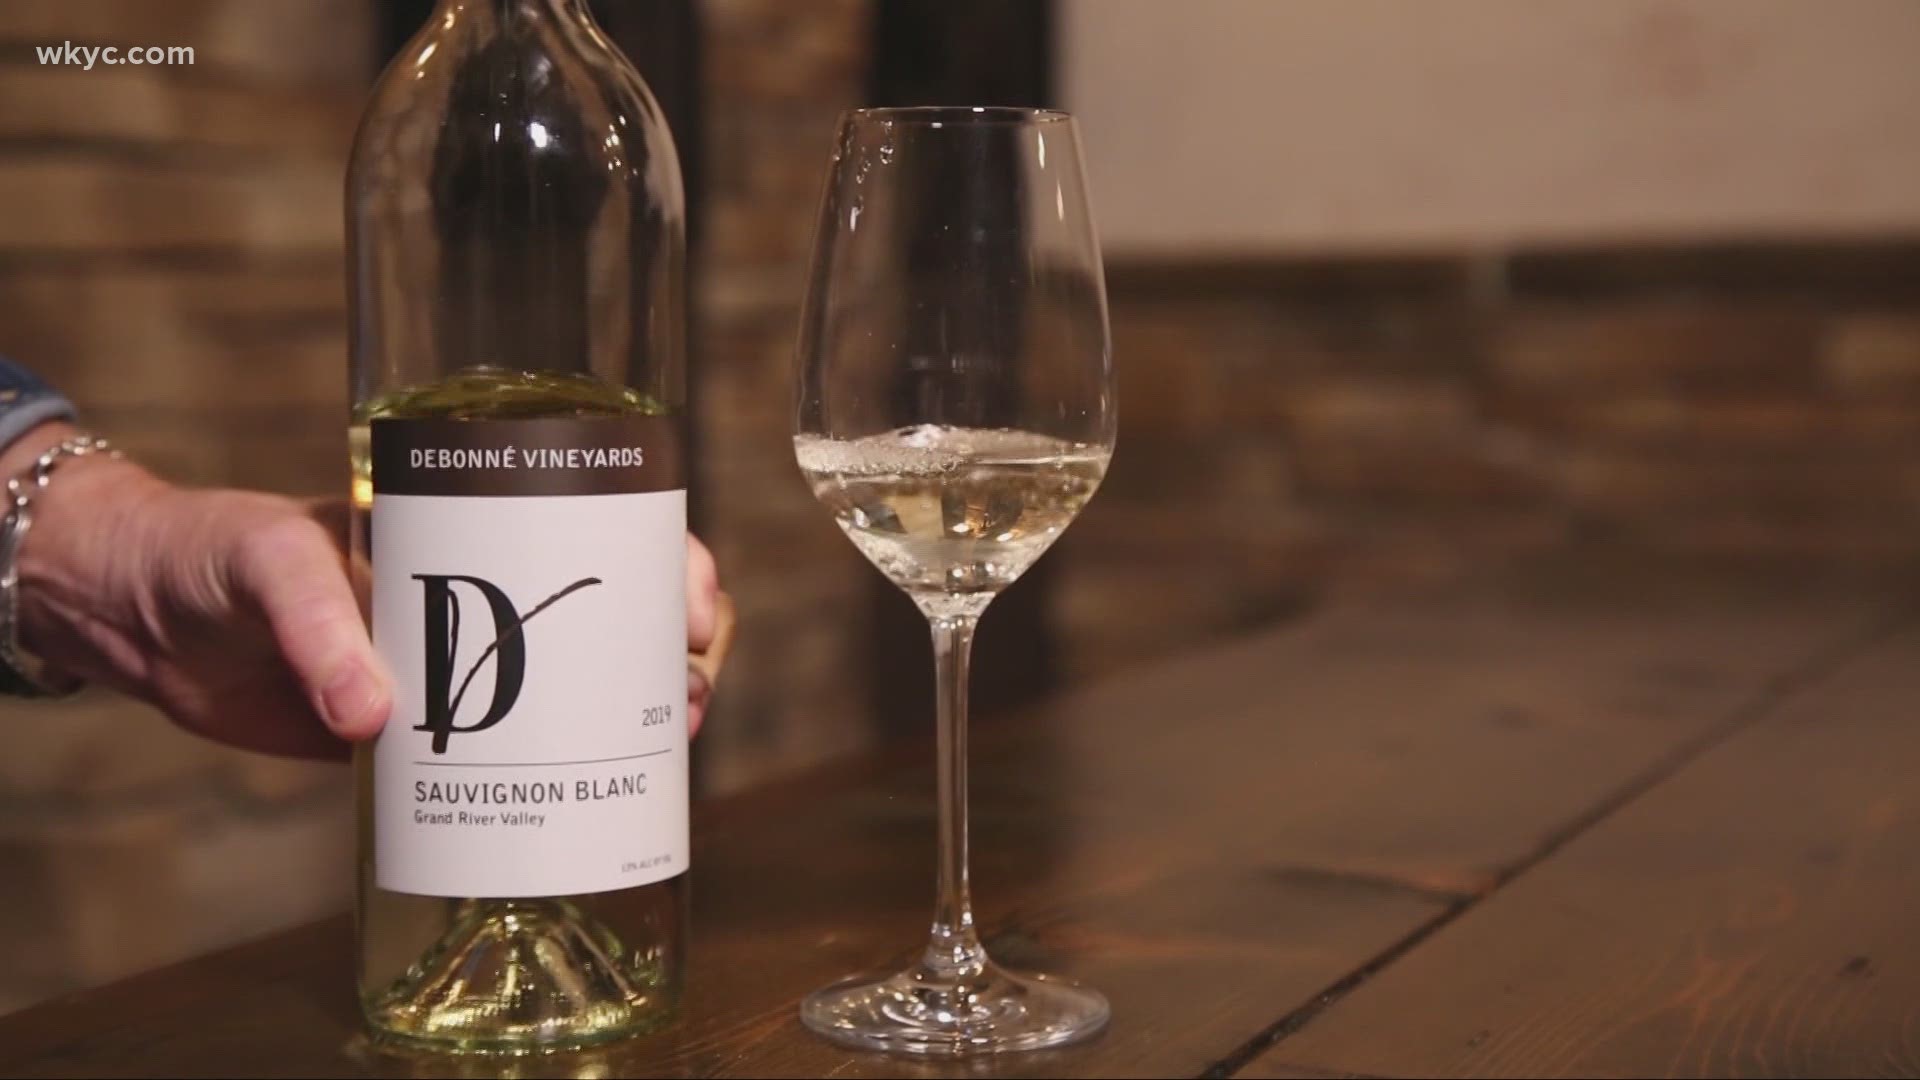 Debonne Vineyards in Madison won double gold. It was for an unoaked Chardonnay, gold for ice wine, and silvers for Sauvignon Blanc and Riesling.  Congratulations!